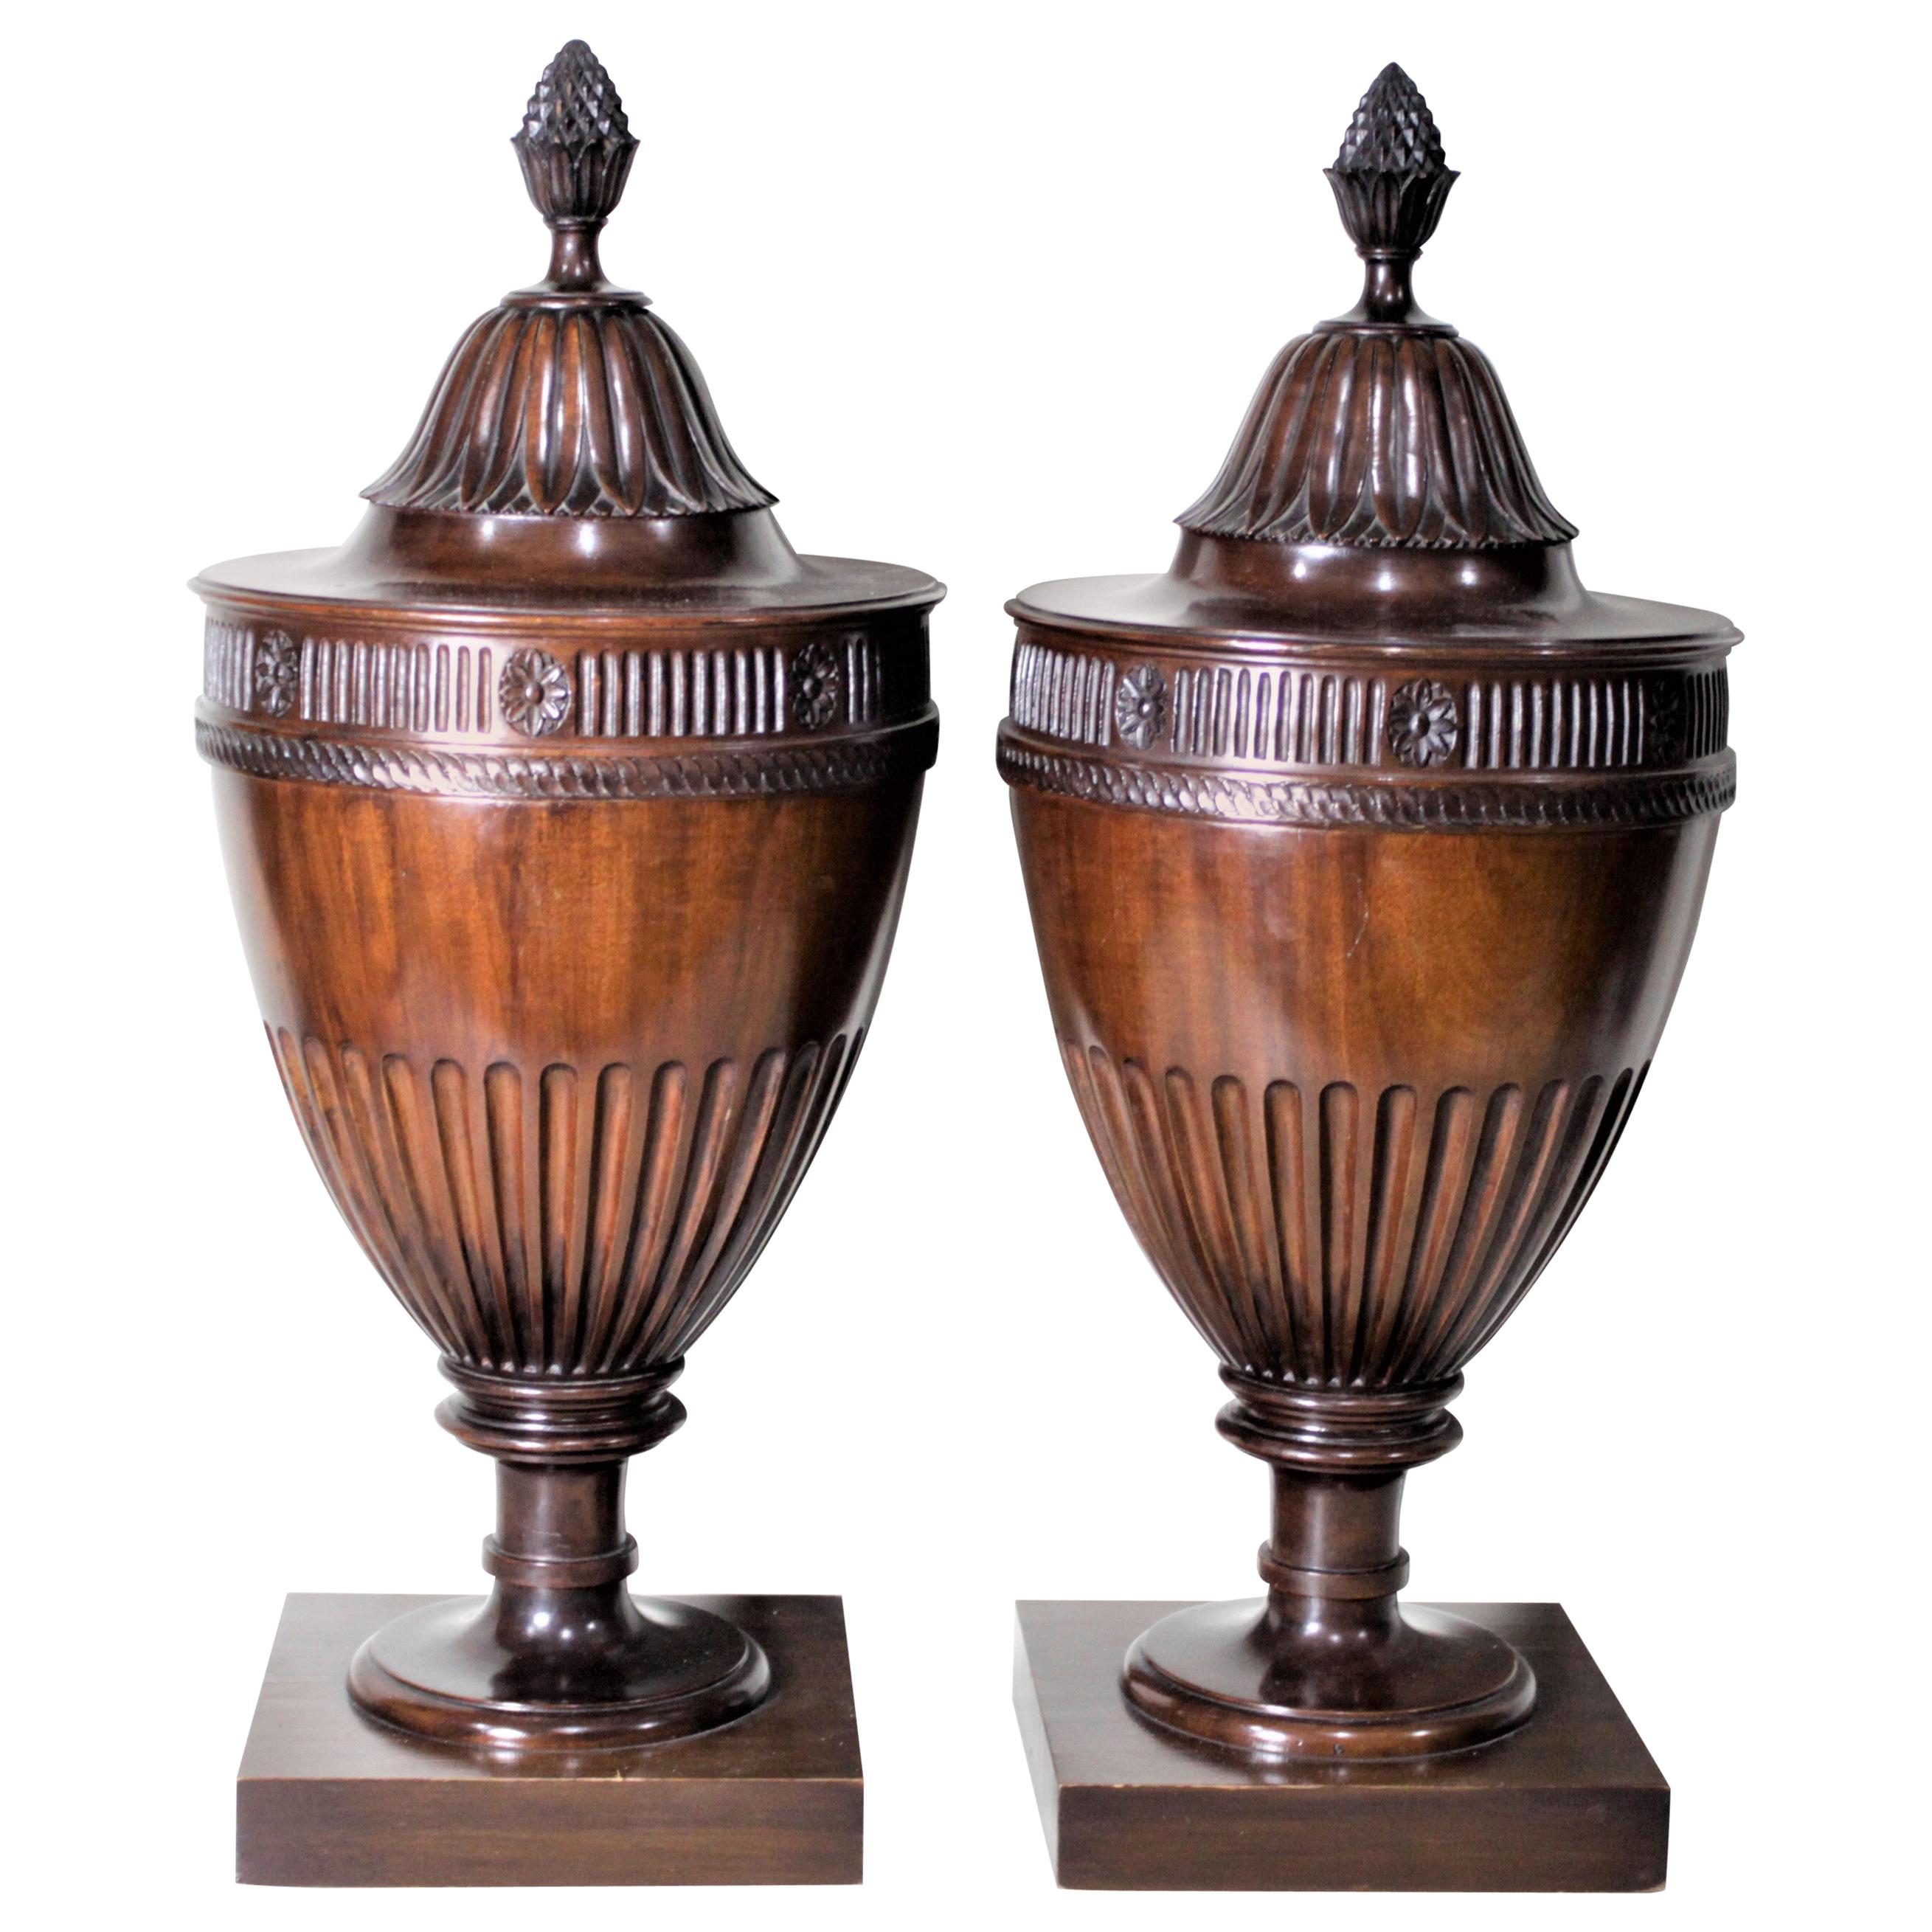 Pair of Antique Georgian Style Mahogany Knife Urns or Boxes with Carved Accents